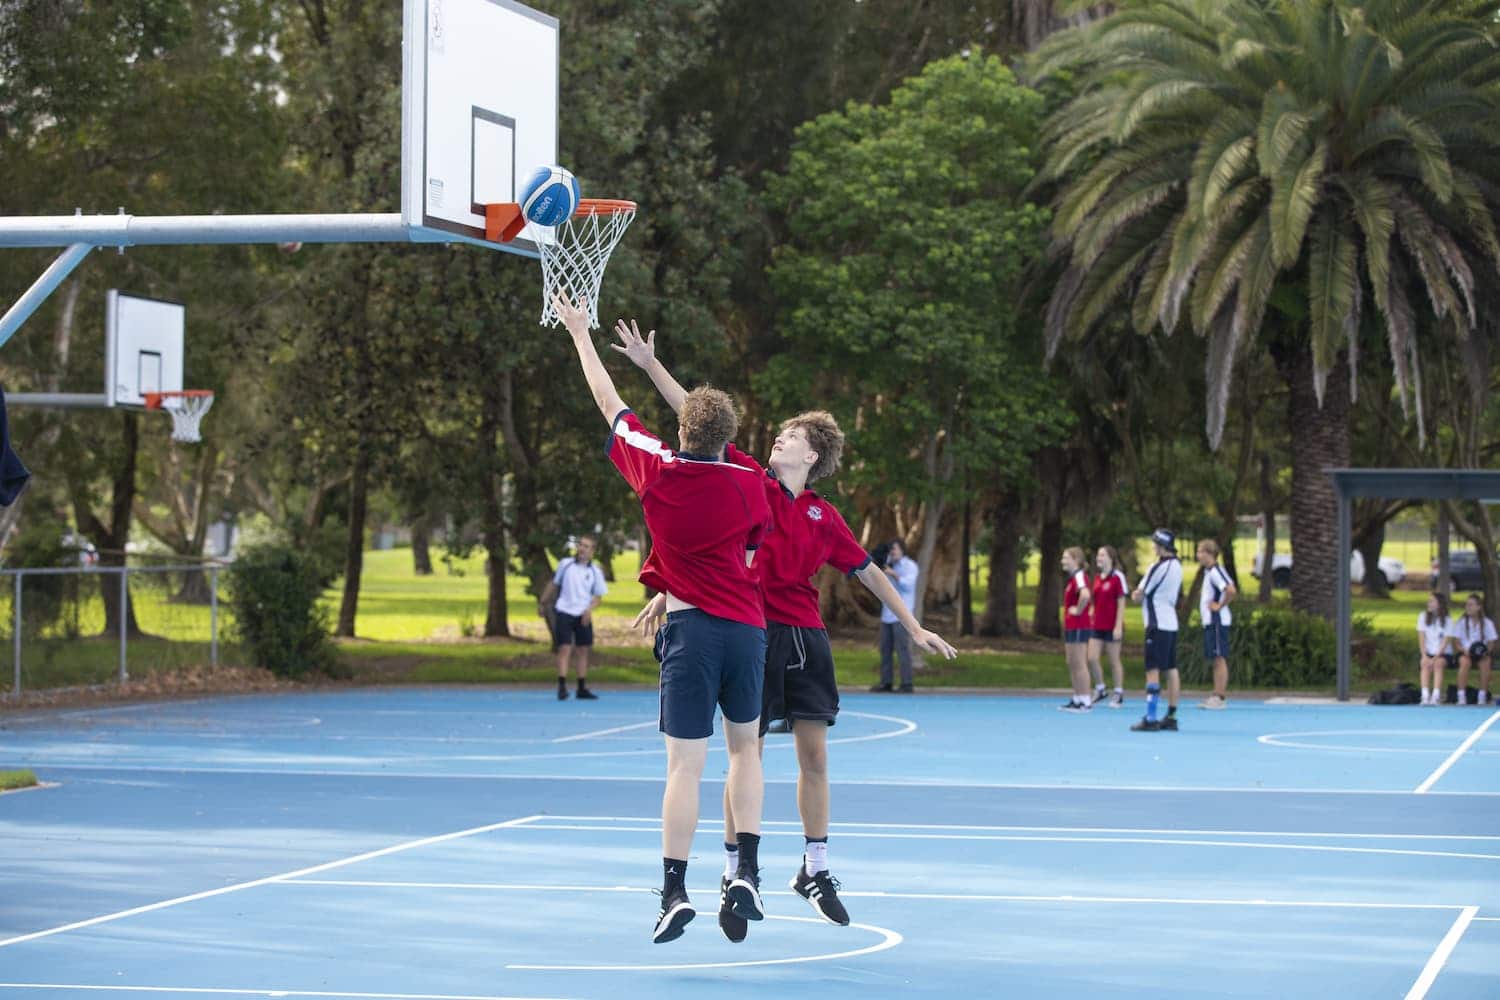 Four new basketball courts were unveiled at the national park this morning.